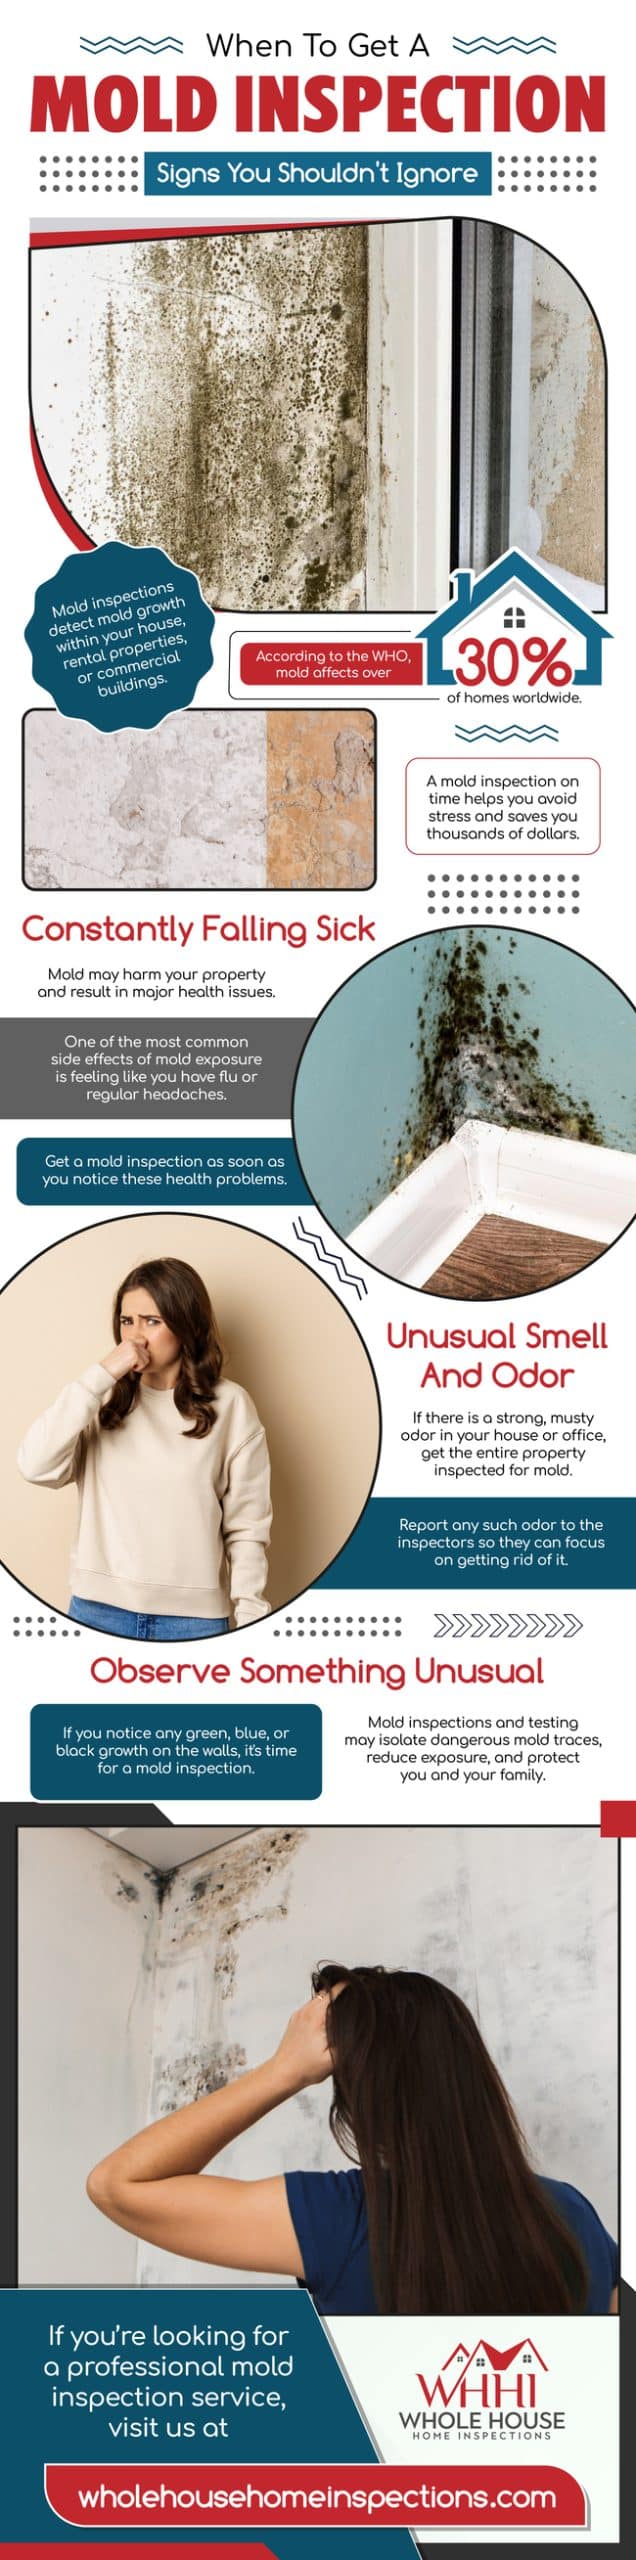 Mold Inspection Signs You Shouldn't Ignore